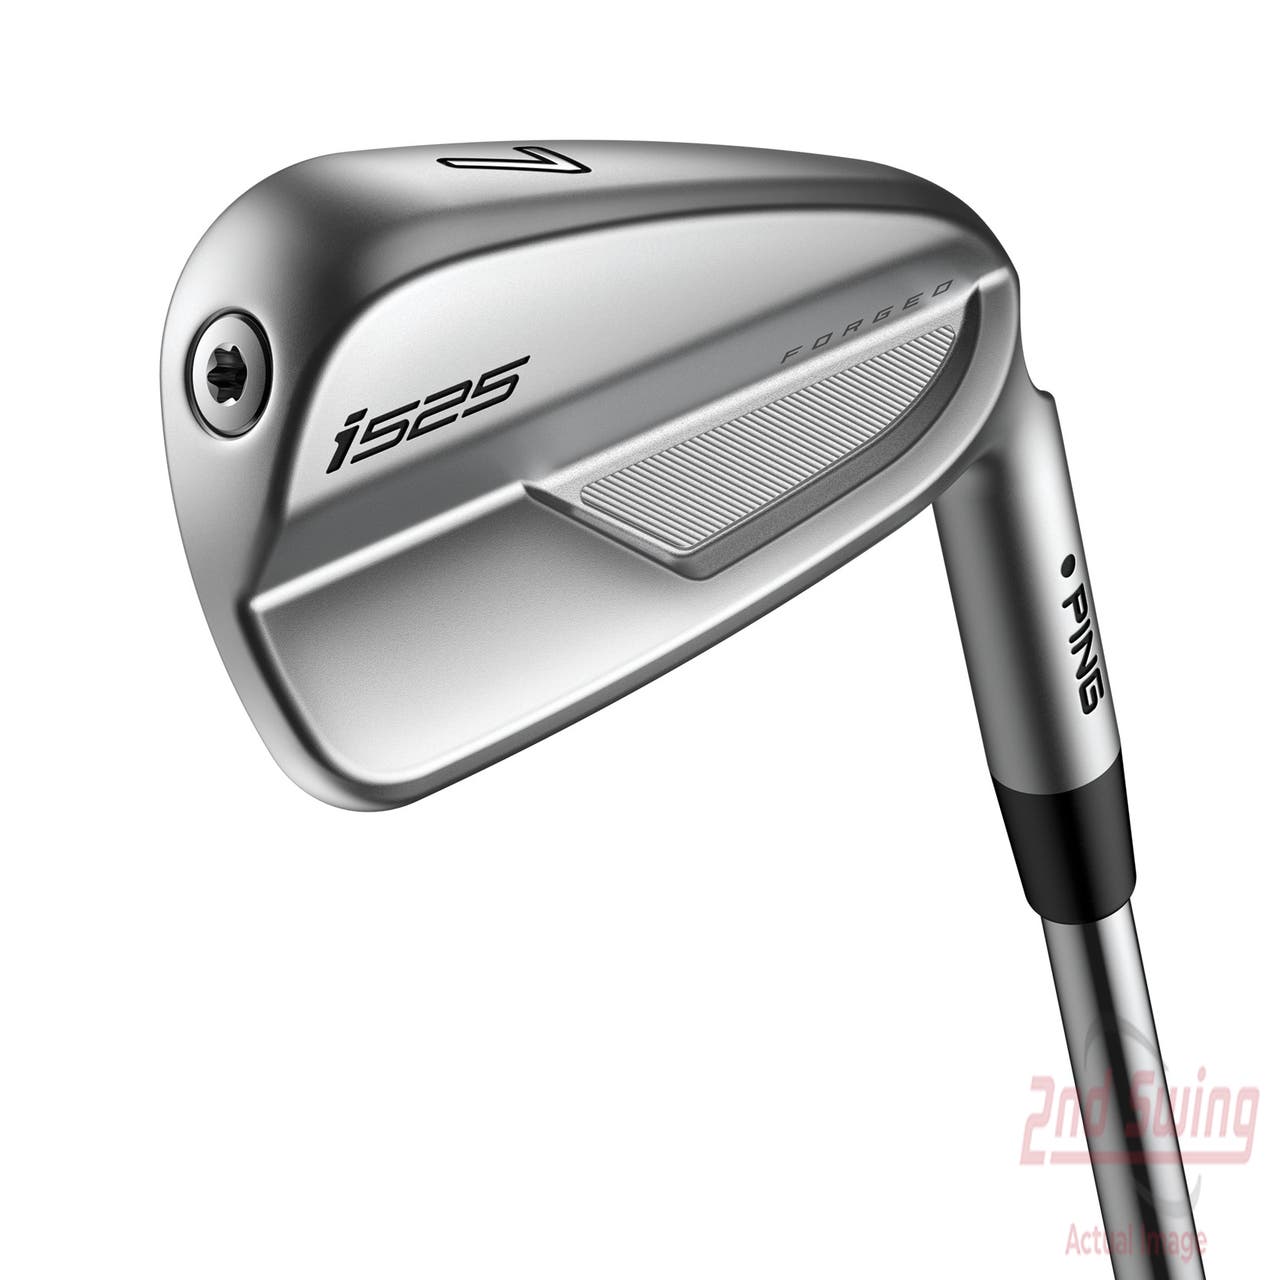 New Ping i525 Iron Set 5-PW AWT 2.0 Steel Regular Right Handed Black Dot 38.25in STD Length